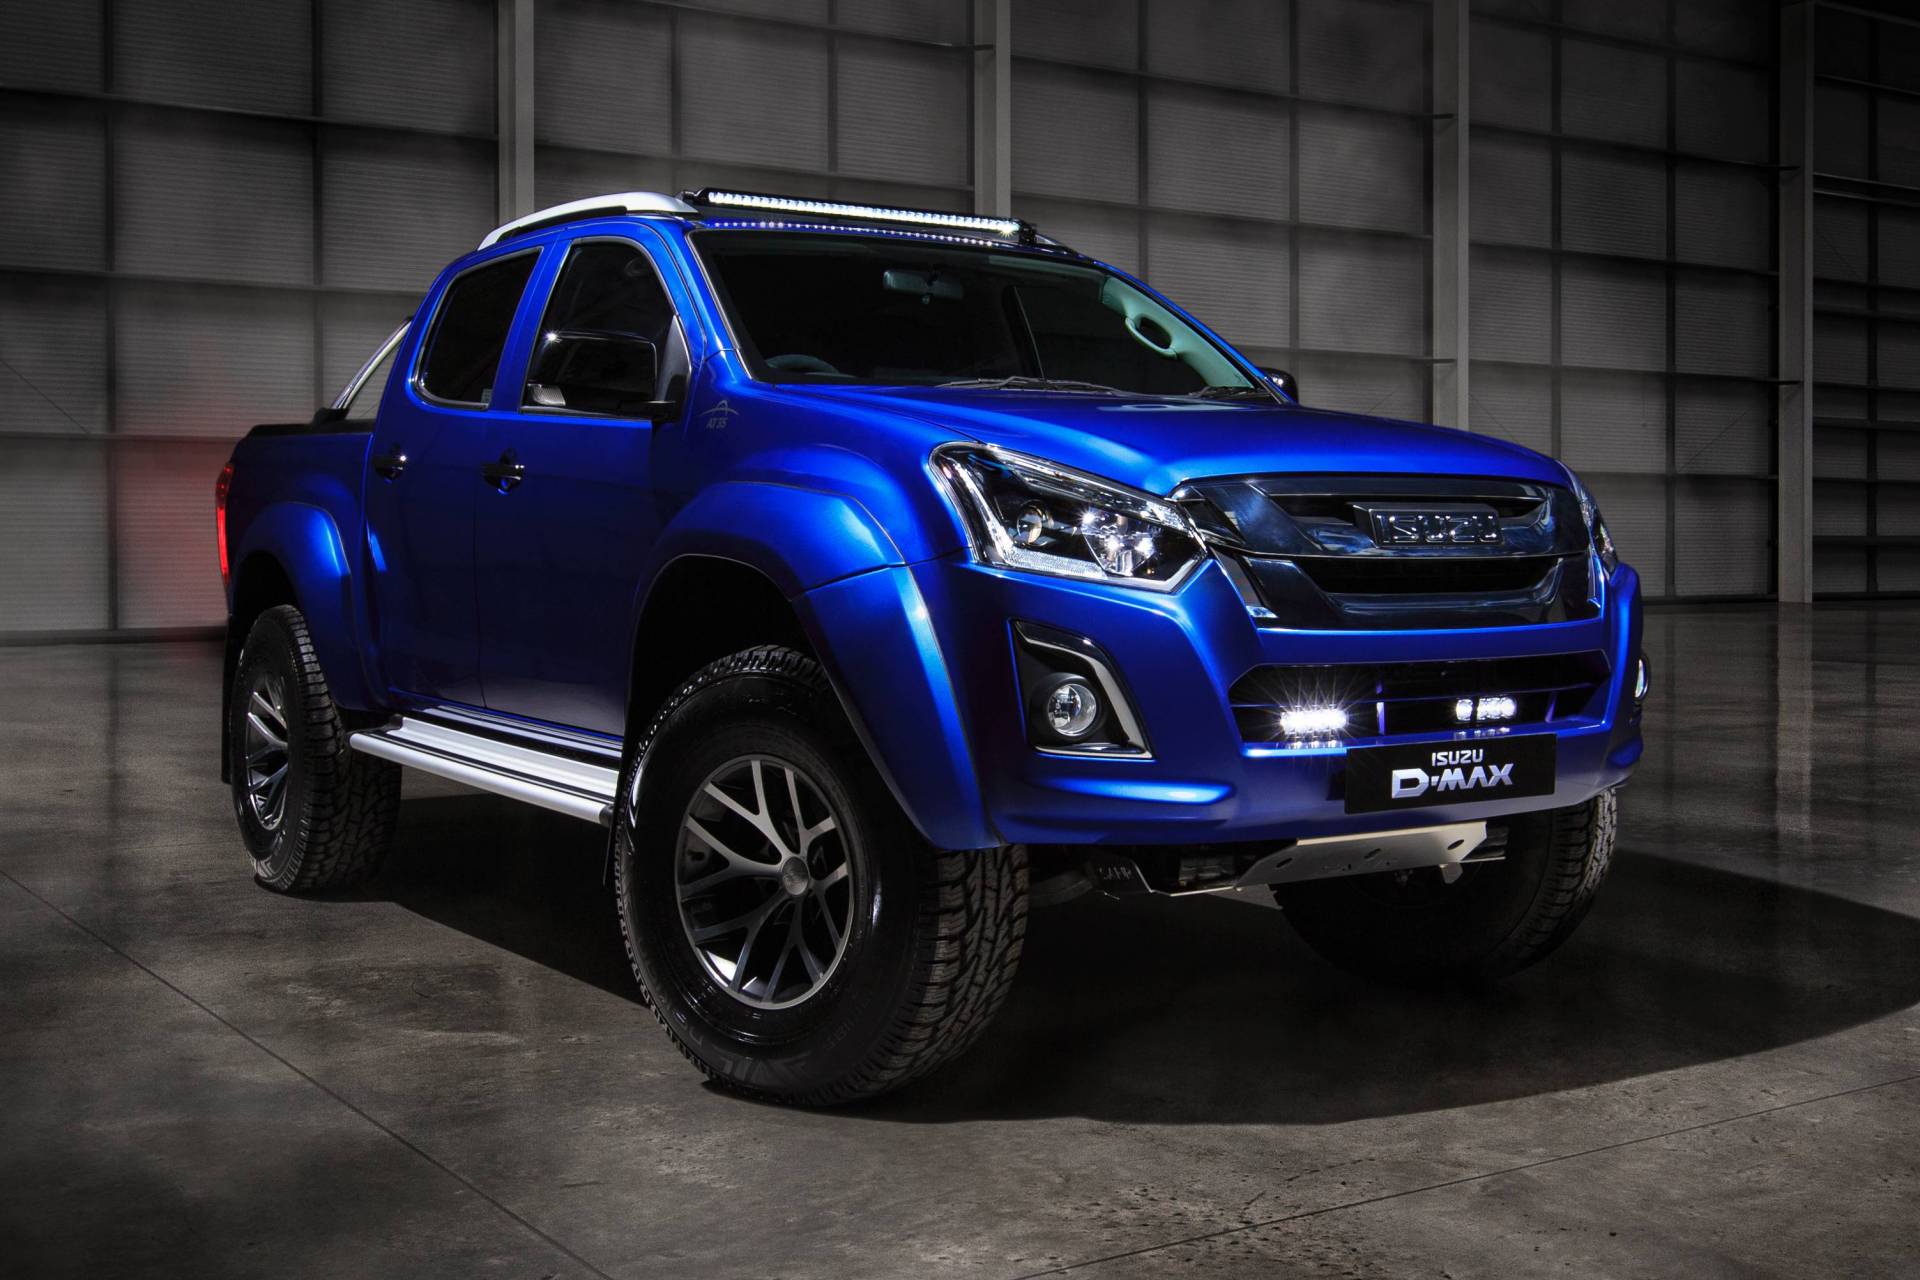 Isuzu D-Max "Safir" Is A Brawny Limited Edition Off-Road Truck | Carscoops